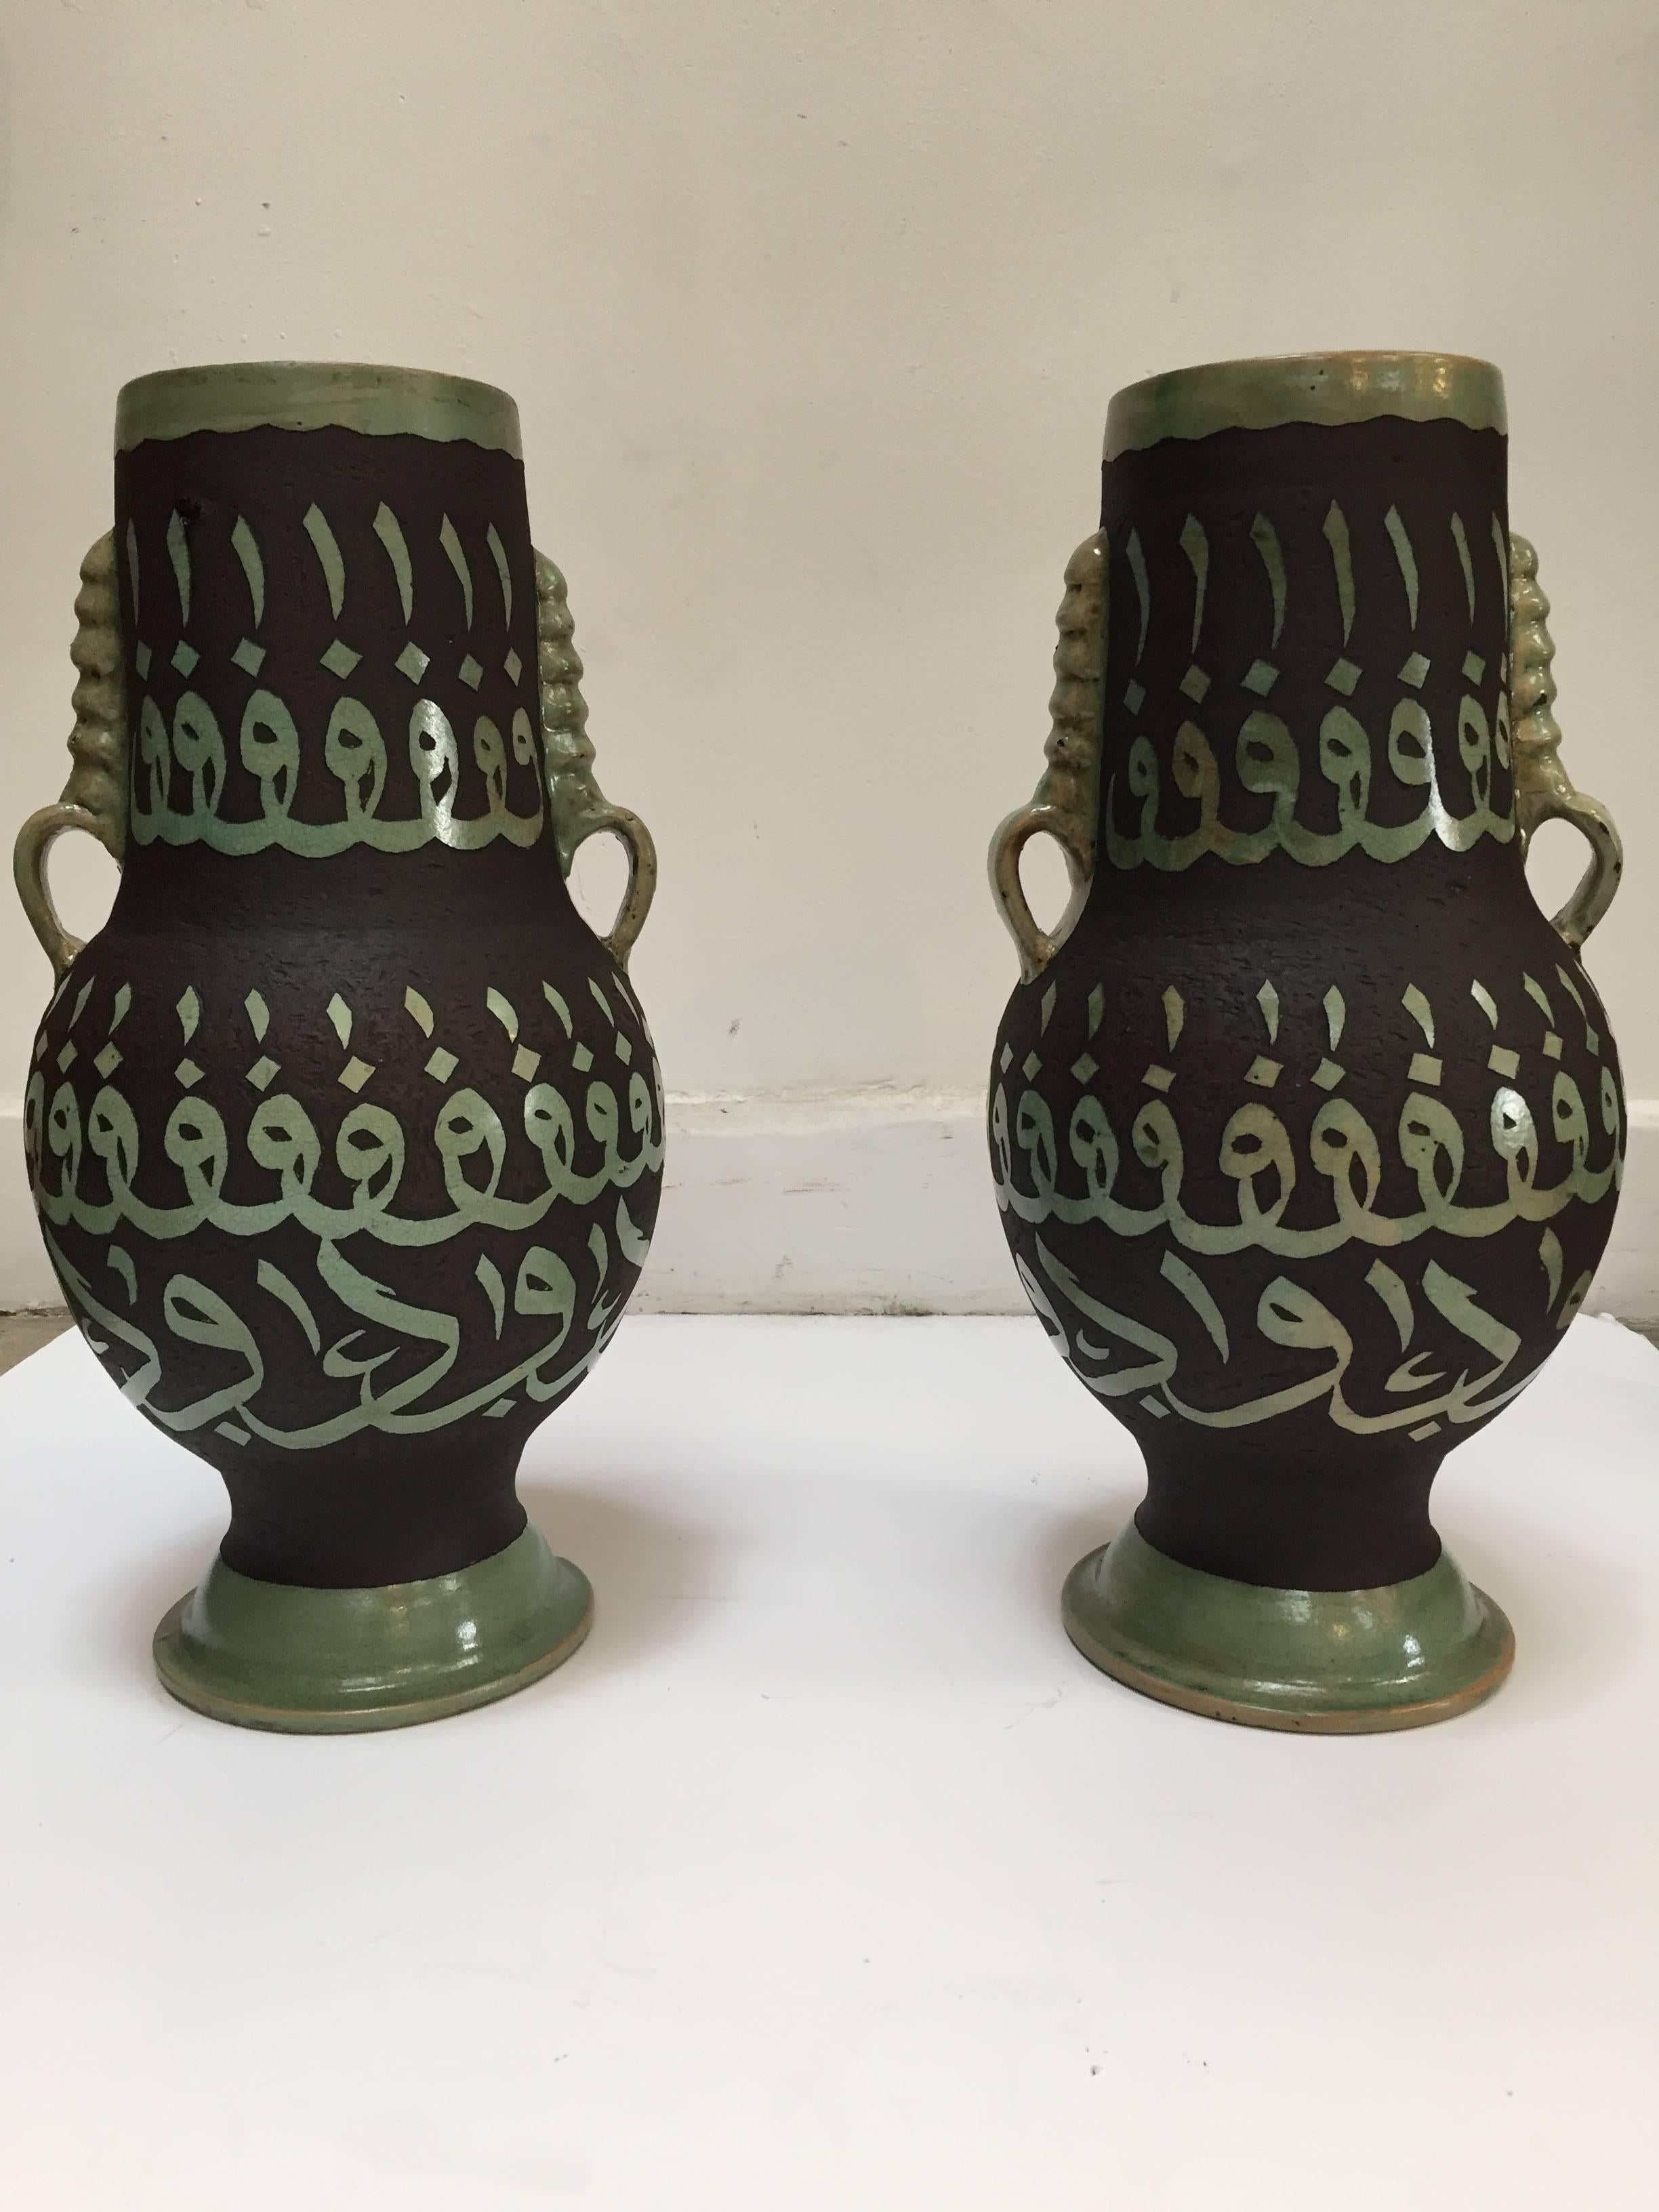 Pair of very decorative chocalate brown and green jade handcrafted Moroccan ceramic vases with handles from Fez.
Hand-graved and chased with green Arabic alphabet writing calligraphy.
Opening is 5 in.
This kind of Moorish chiseled ceramic art work